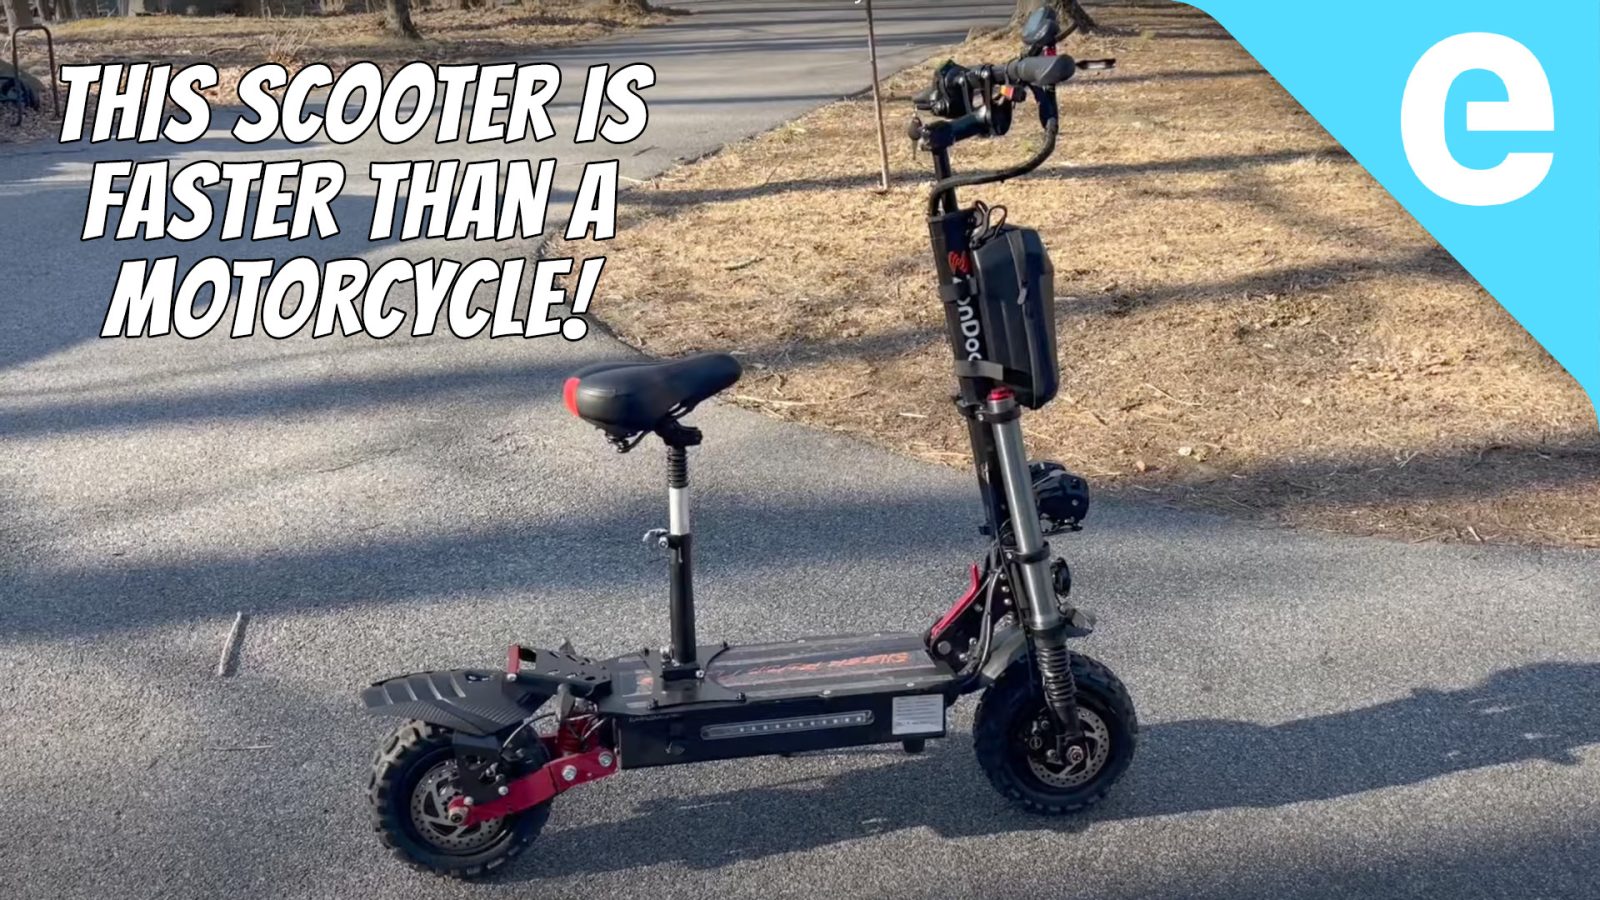 Light motorcycle power put on a kick scooter? We try ZonDoo’s unreal ZO03